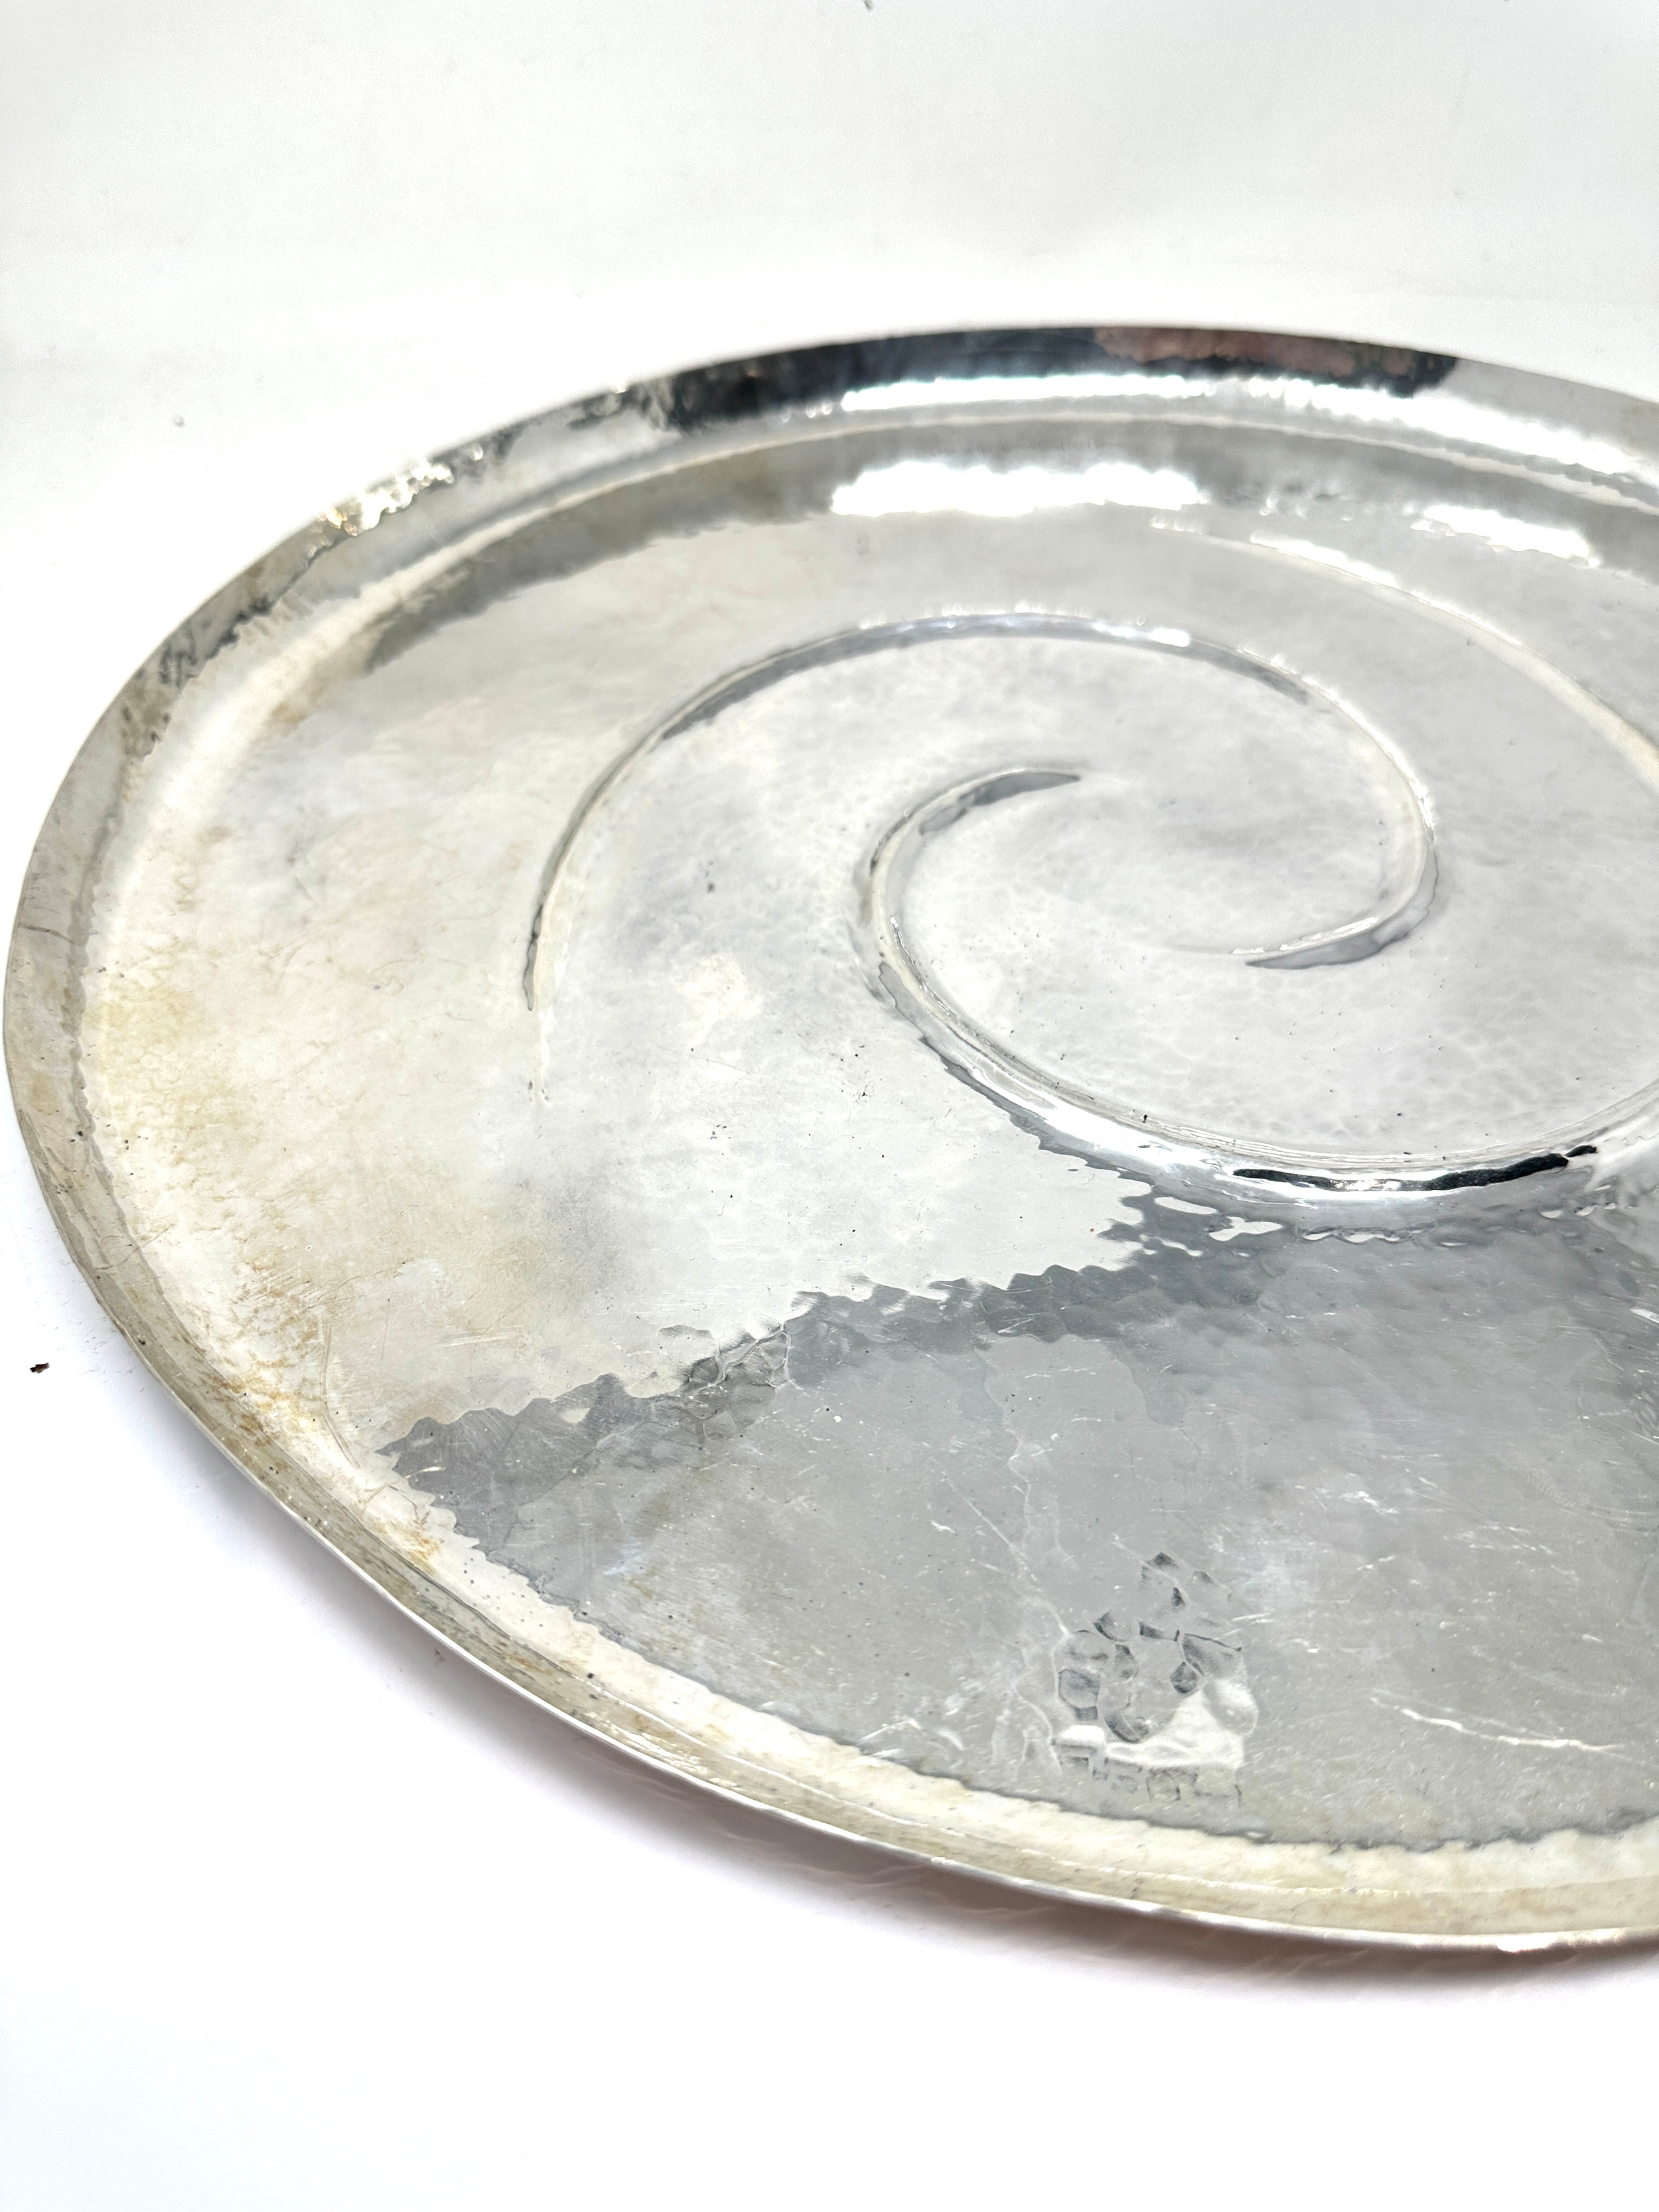 Large 1988 modernist design finnish silver tray measures approx 40cm dia weight 1201g - Image 2 of 4